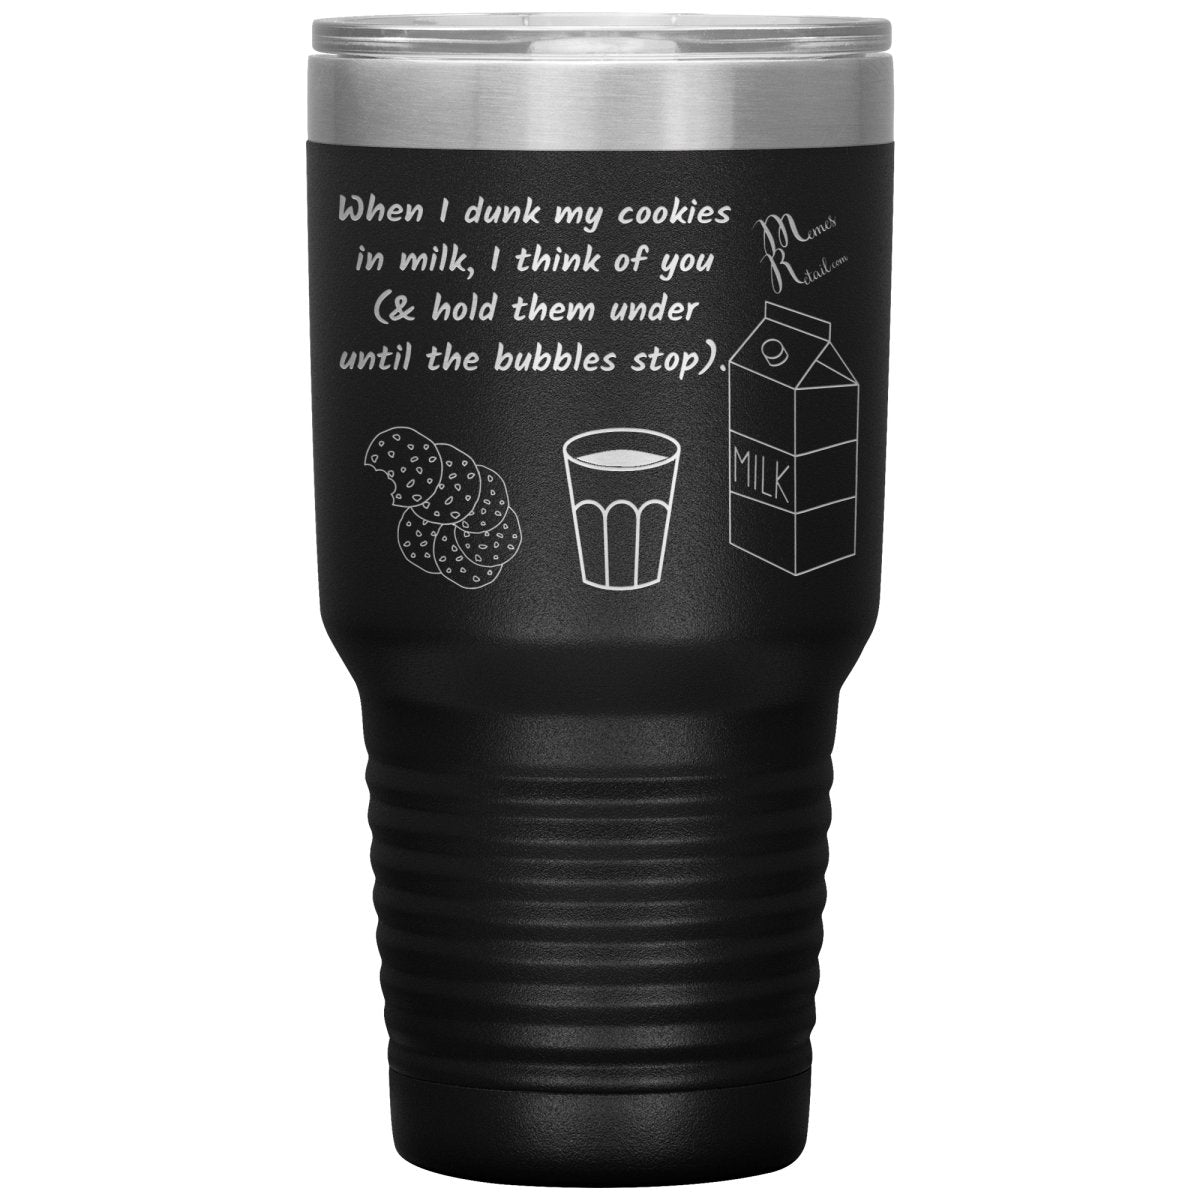 When I dunk My Cookies in Milk, I think of You - Tumblers, 30oz Insulated Tumbler / Black - MemesRetail.com